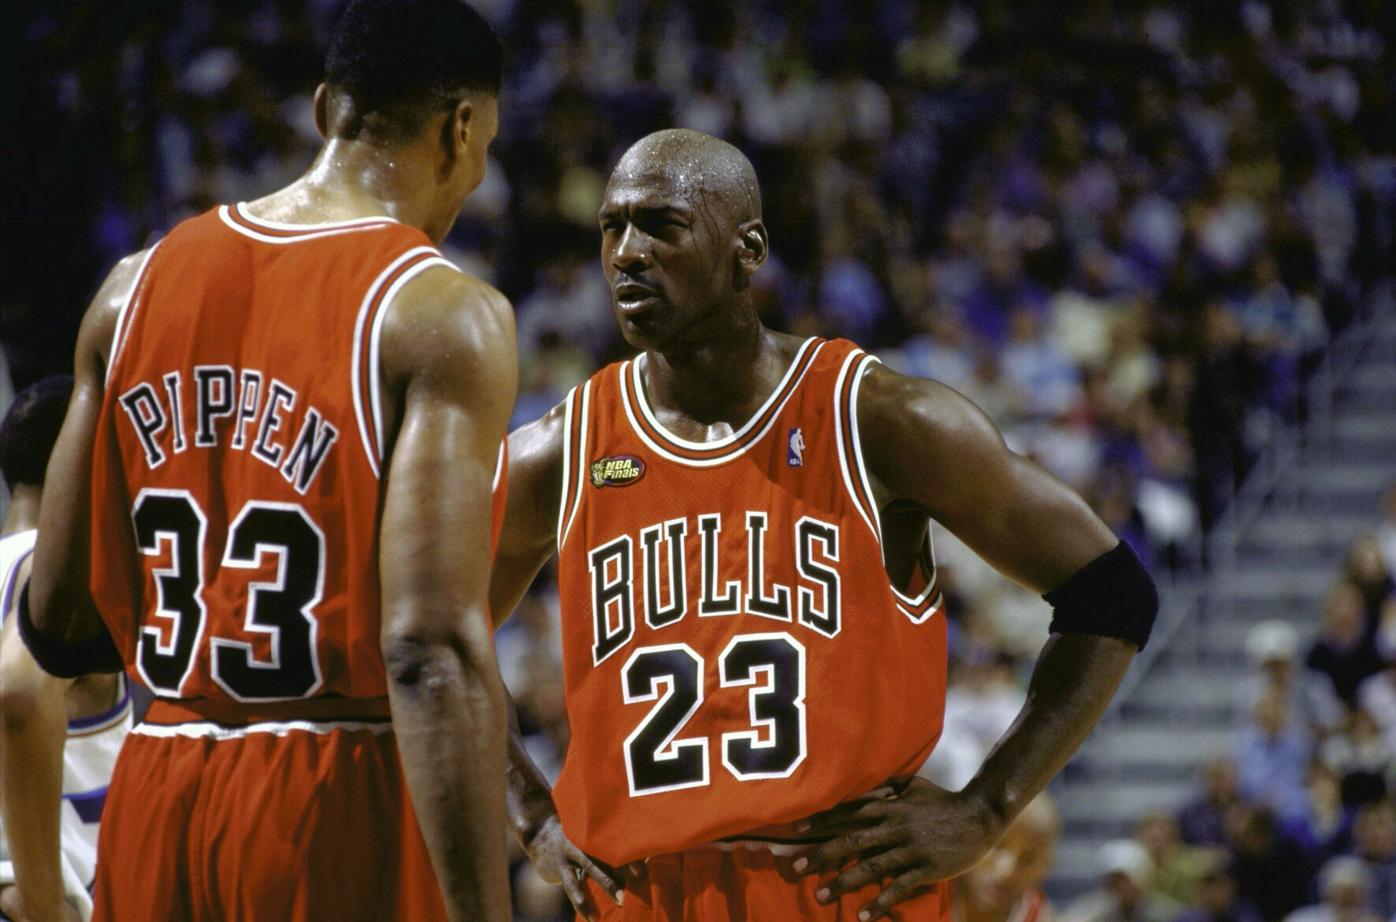 Michael Jordan 1998 NBA Finals jersey expected to sell for insane price